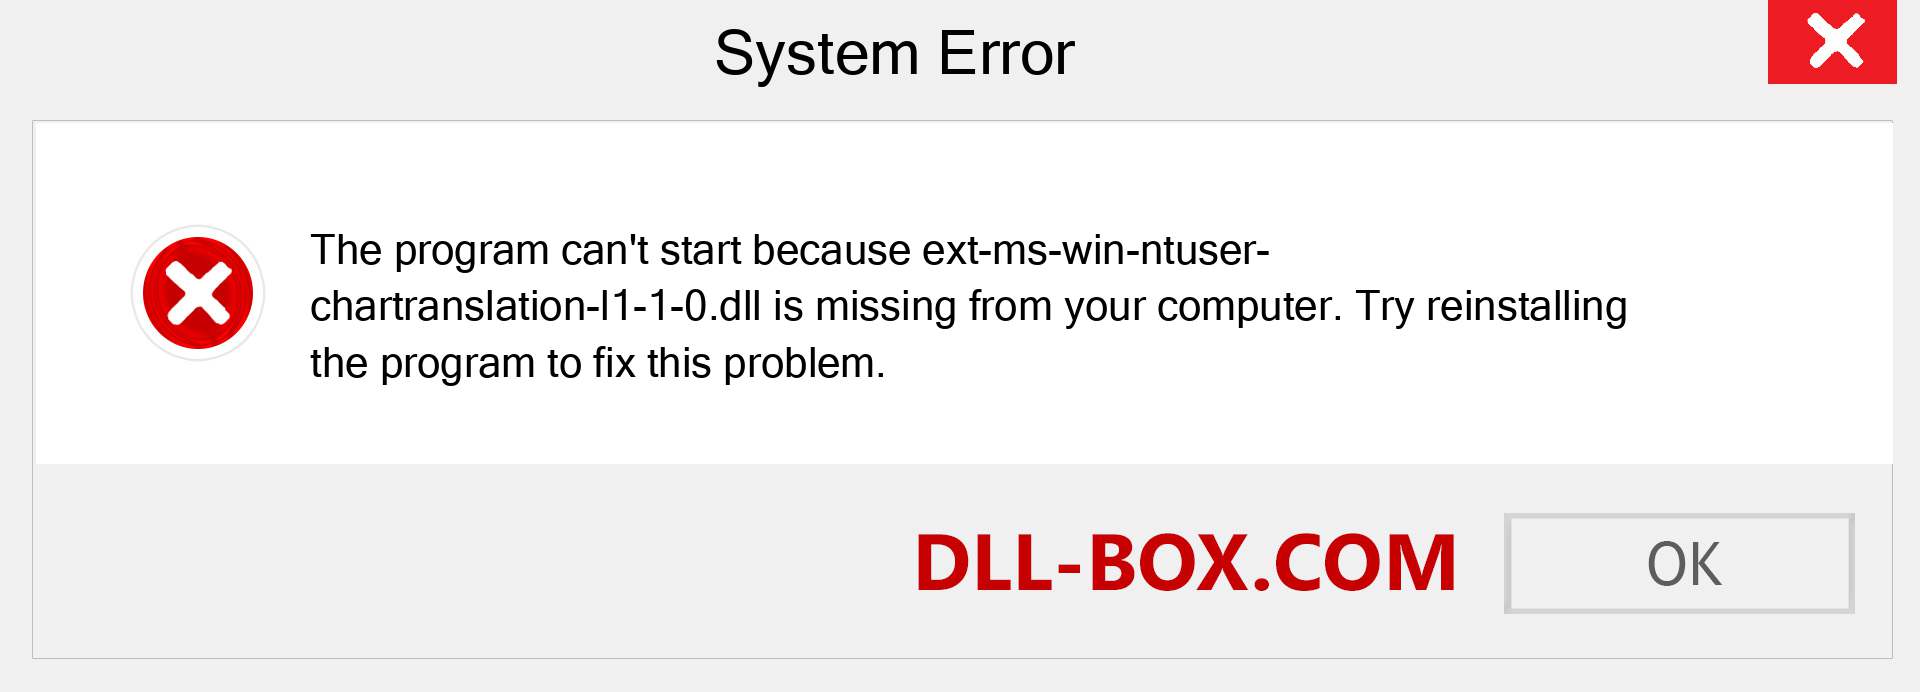  ext-ms-win-ntuser-chartranslation-l1-1-0.dll file is missing?. Download for Windows 7, 8, 10 - Fix  ext-ms-win-ntuser-chartranslation-l1-1-0 dll Missing Error on Windows, photos, images